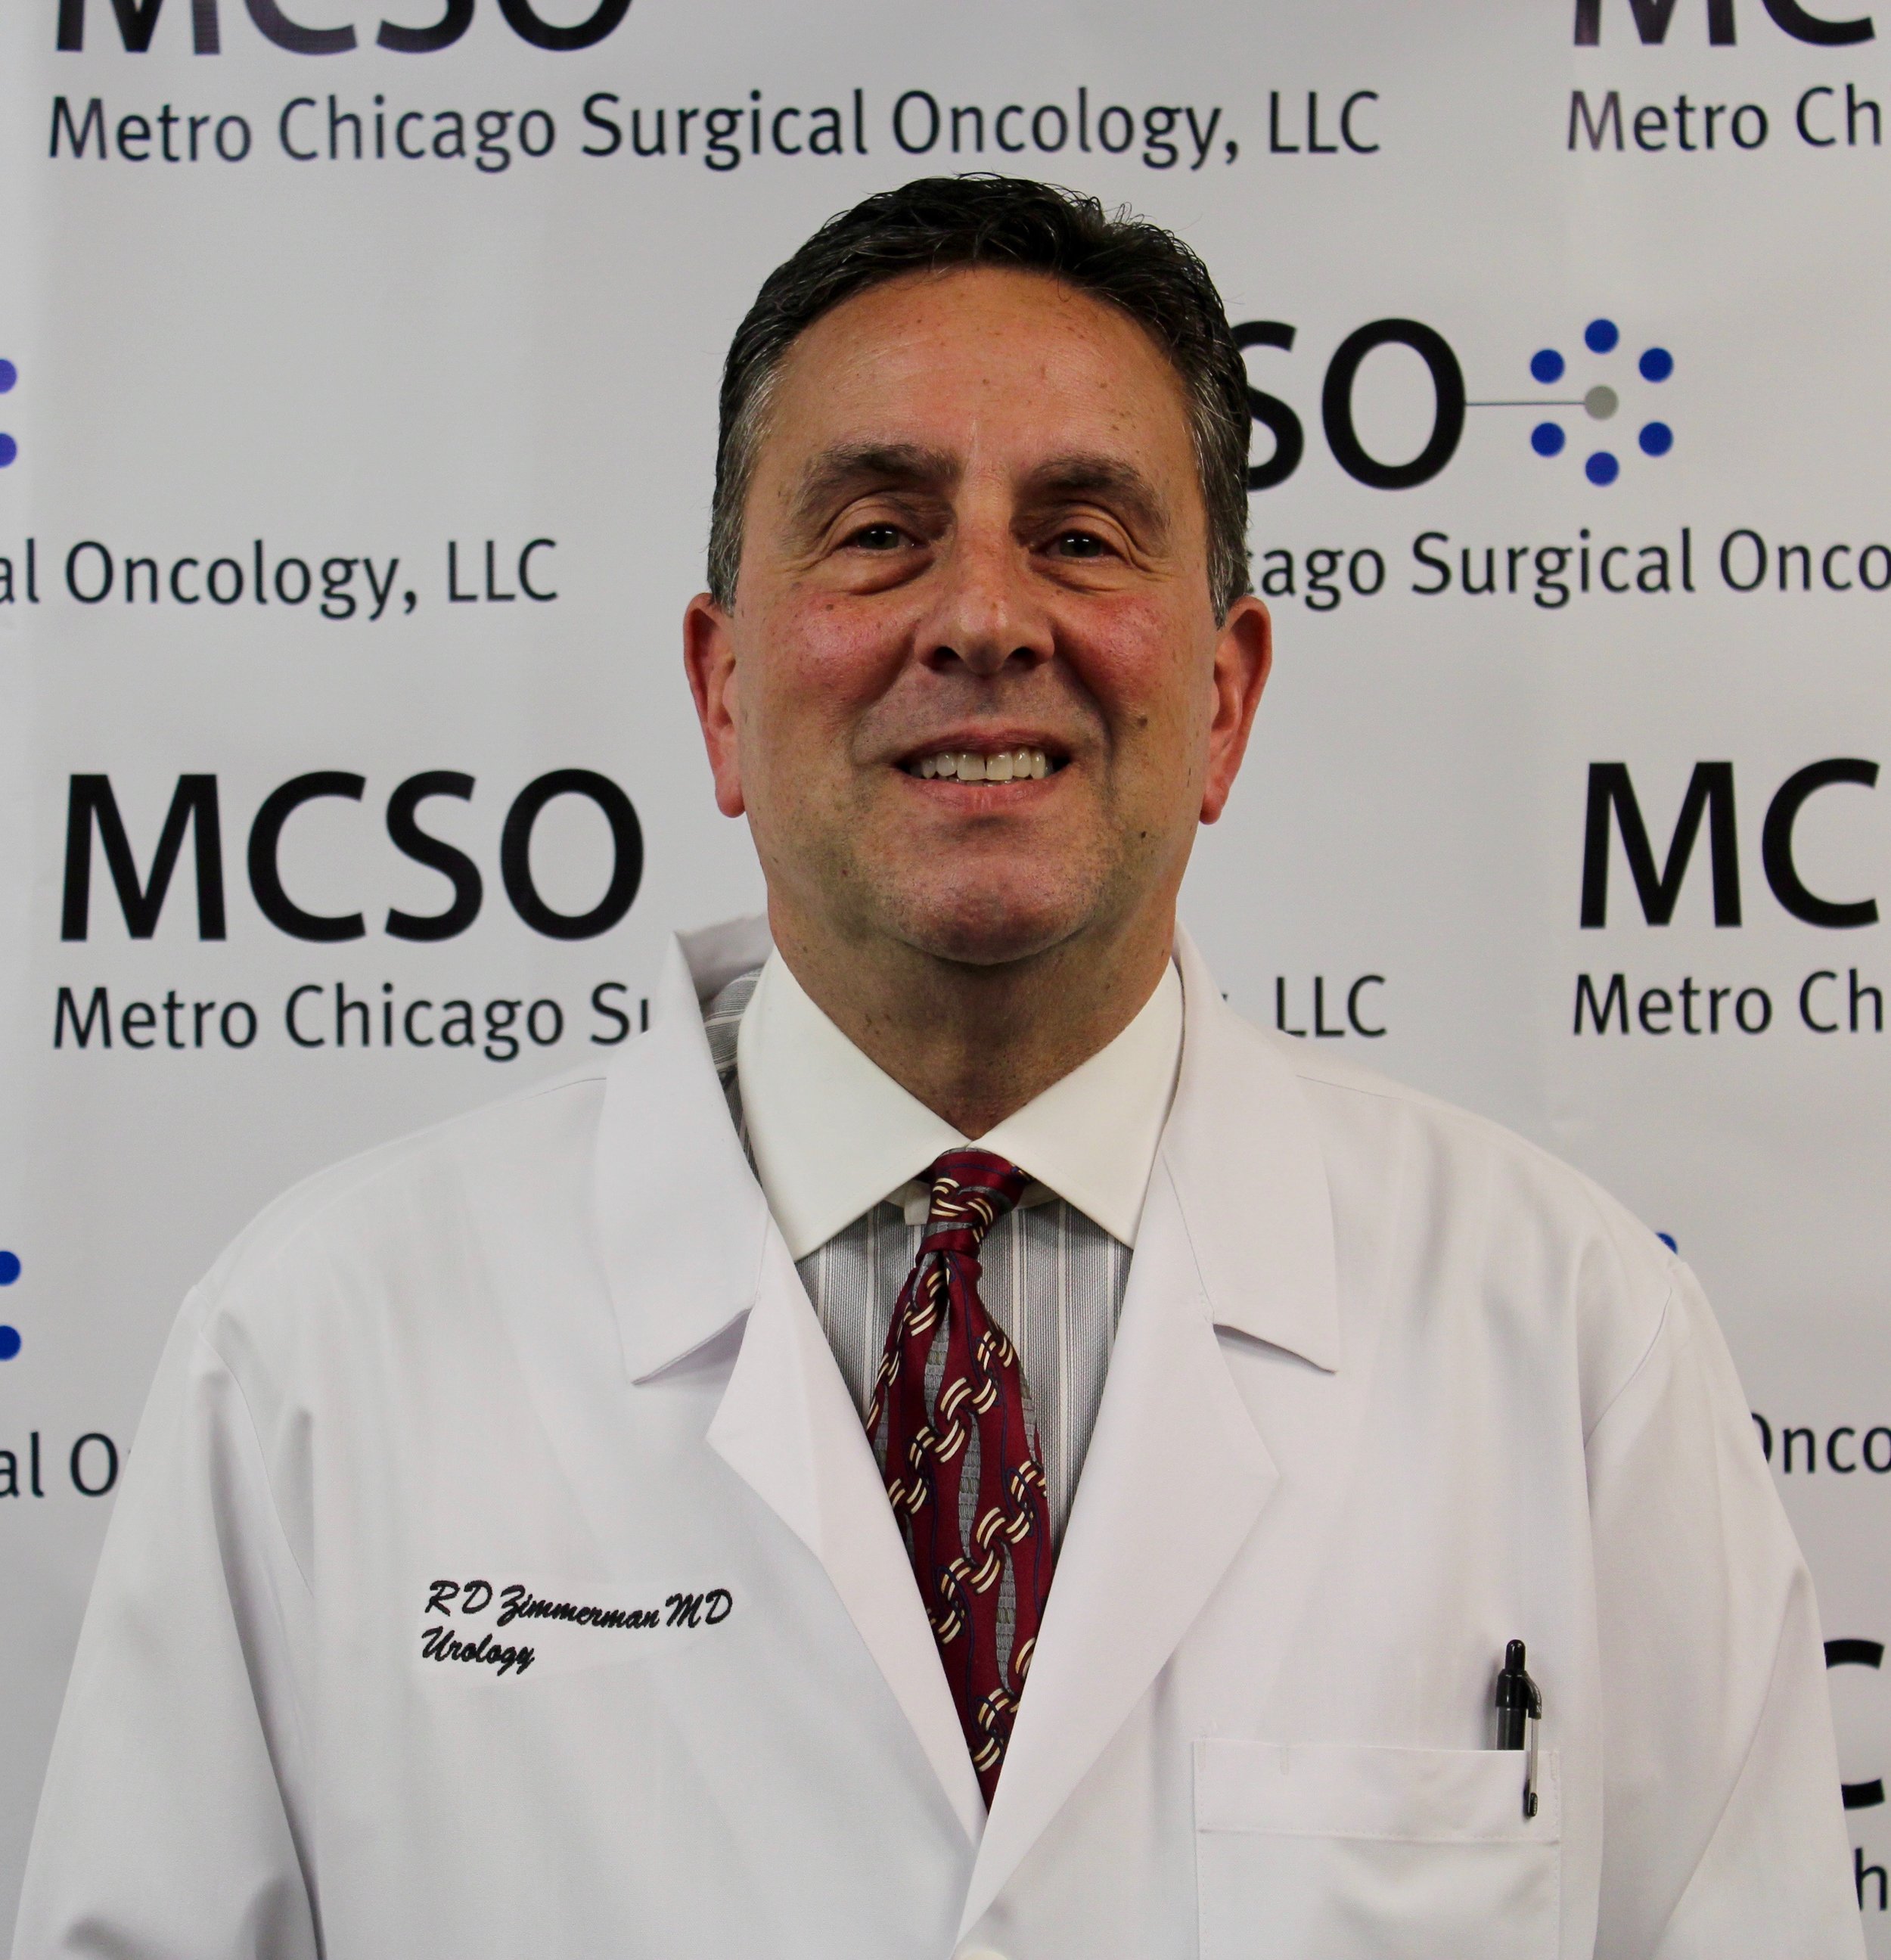 Mark J. Schacht, MD — Metro Chicago Surgical Oncology